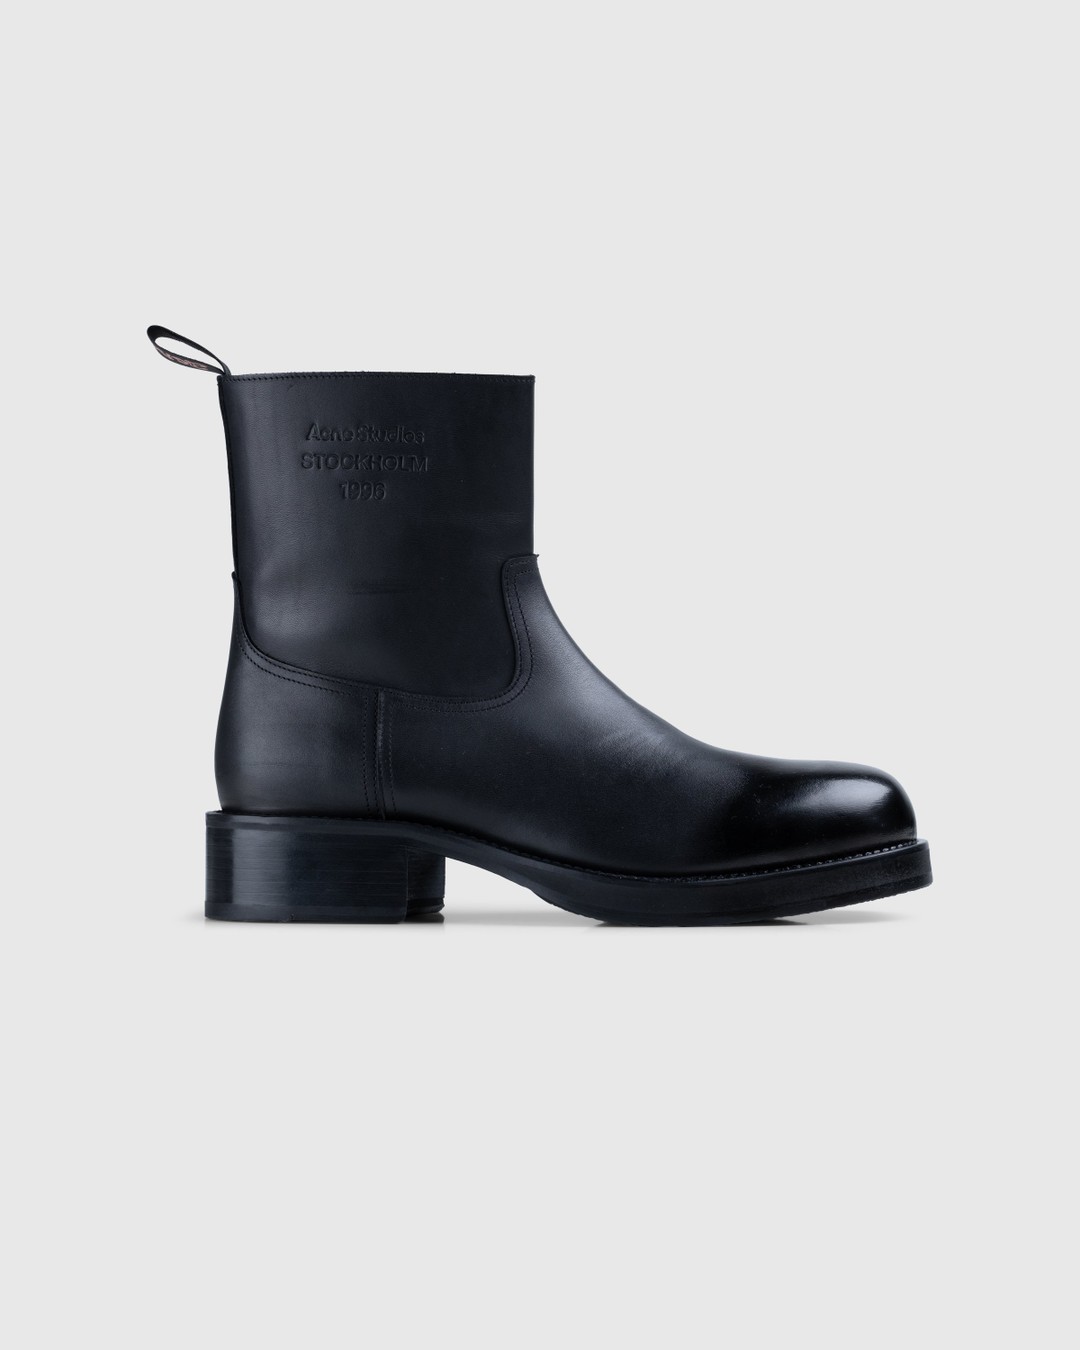 Acne Studios – Sprayed Leather Ankle Boots Black - Zip-up & Buckled Boots - Black - Image 1